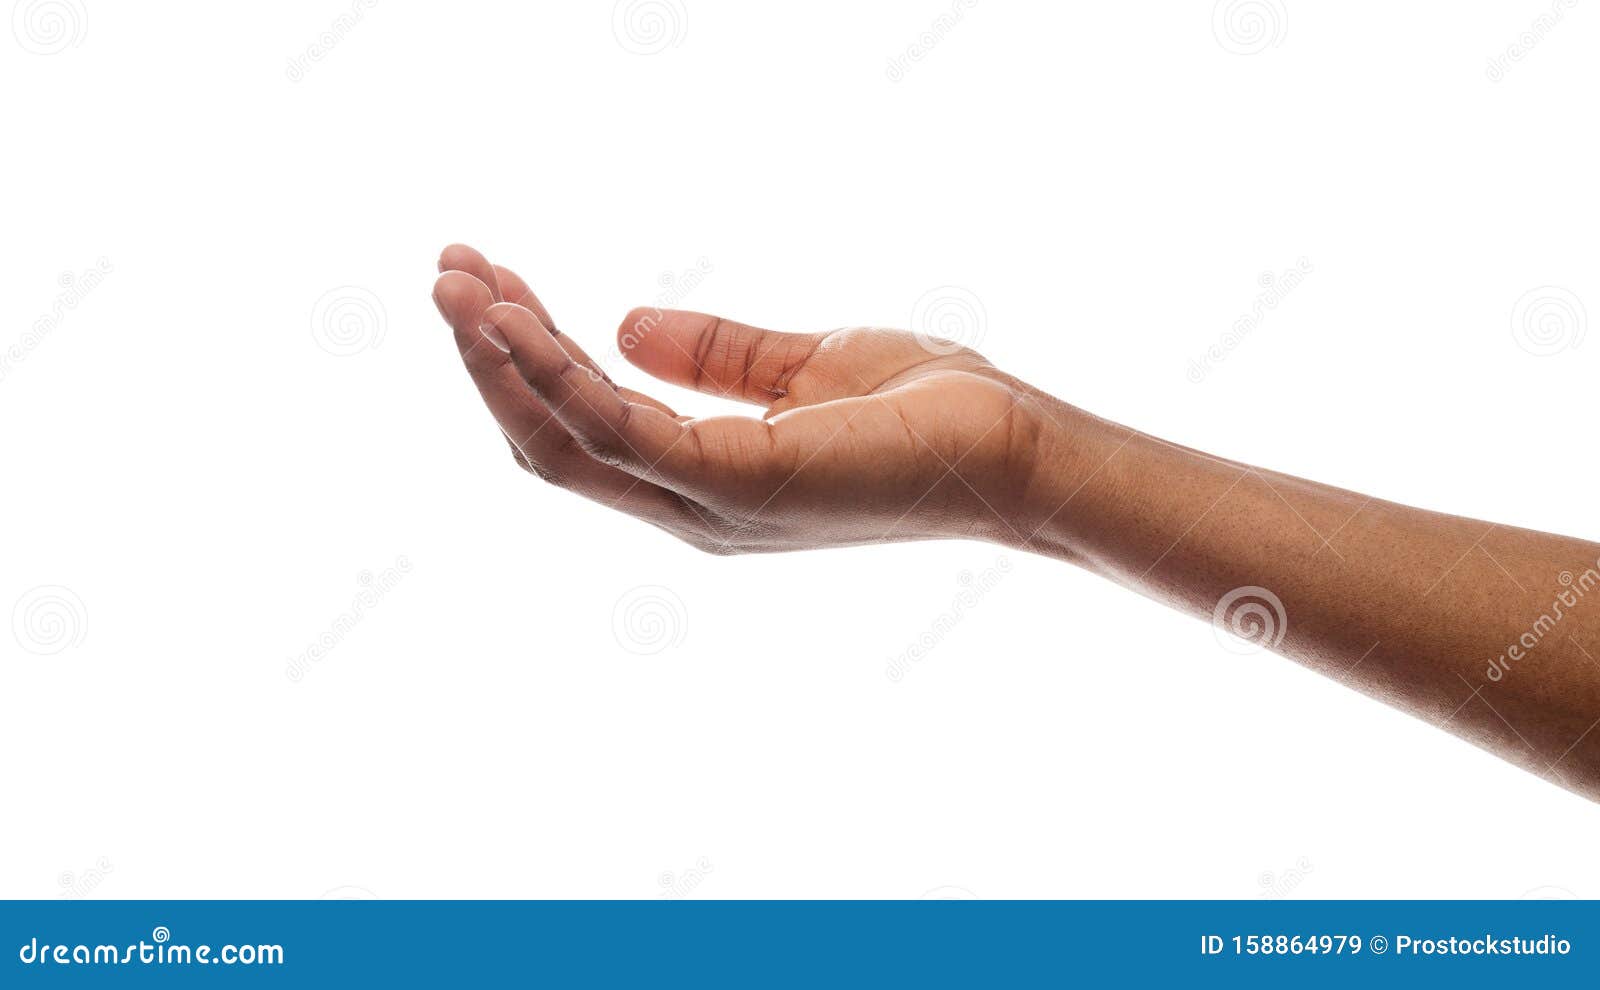 female hand keeping empty cupped palm  on white background